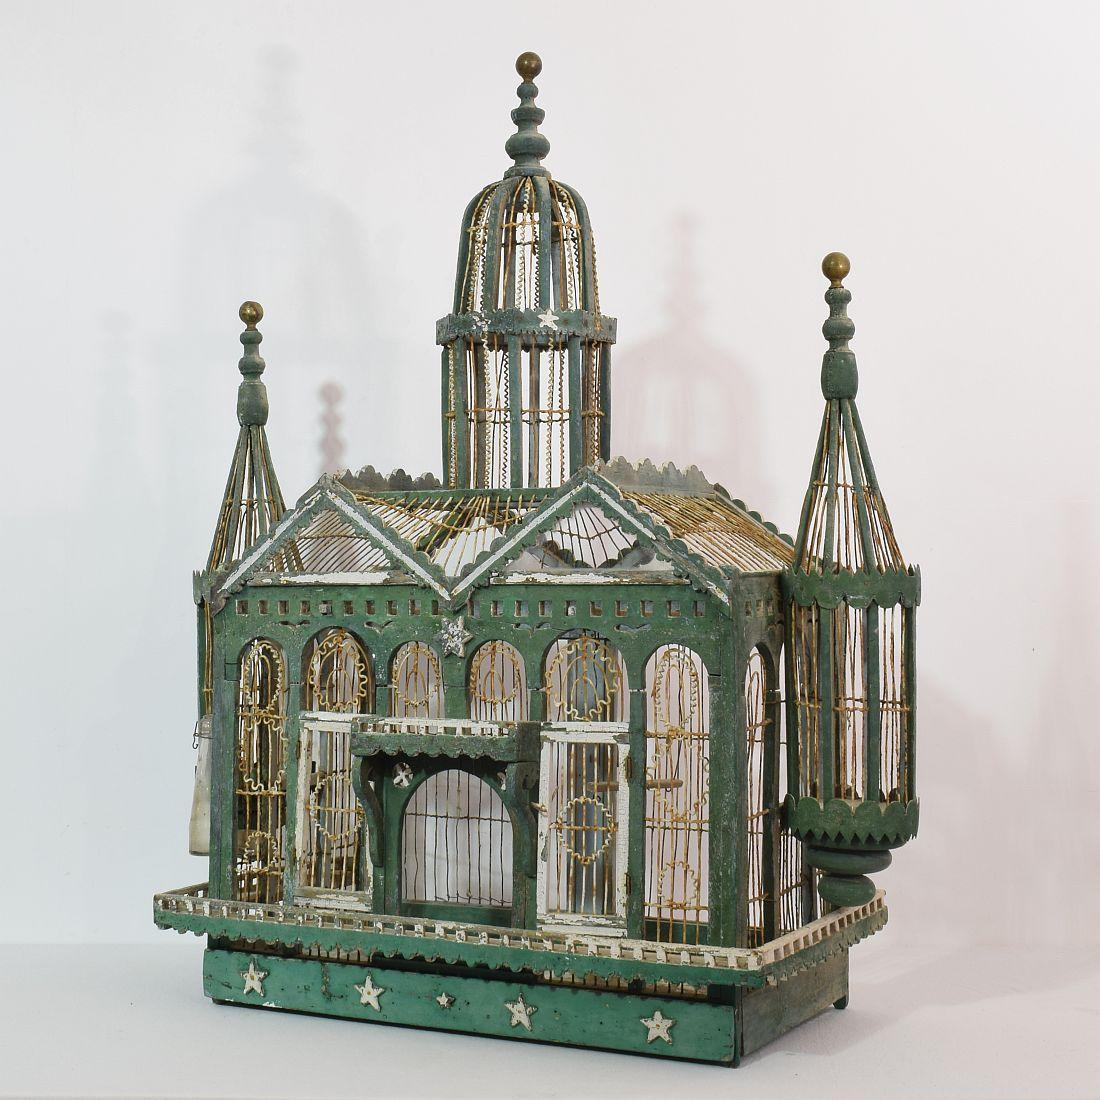 Beautiful and unique French birdcage from the Belle Époque. Great weathered green color. Extremely rare find.
France, circa 1880-1900
Weathered, losses and old repairs. More pictures are available on request.